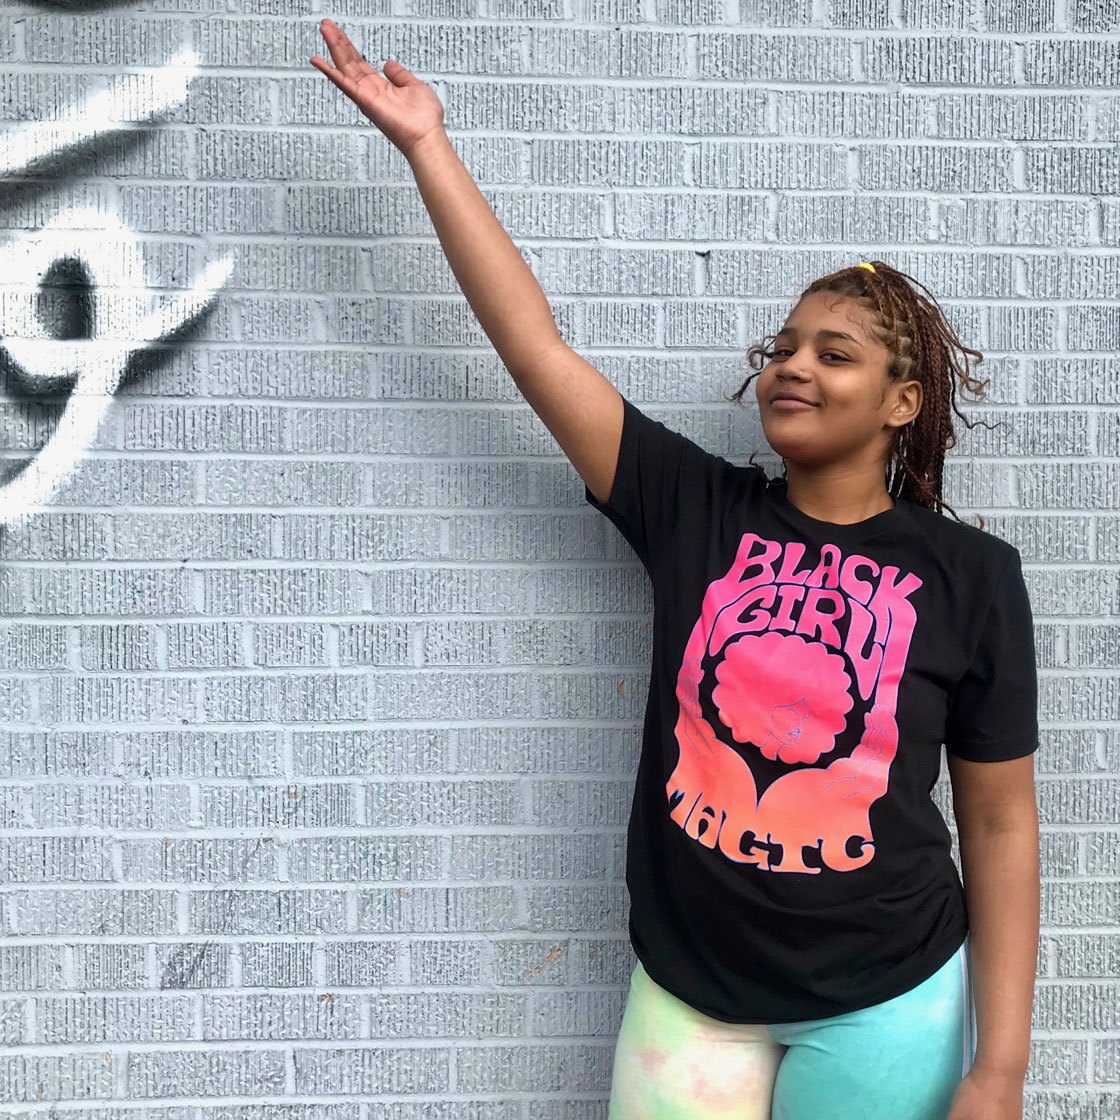 A young person posing wearing a decorative t shirt with the words black girl magic